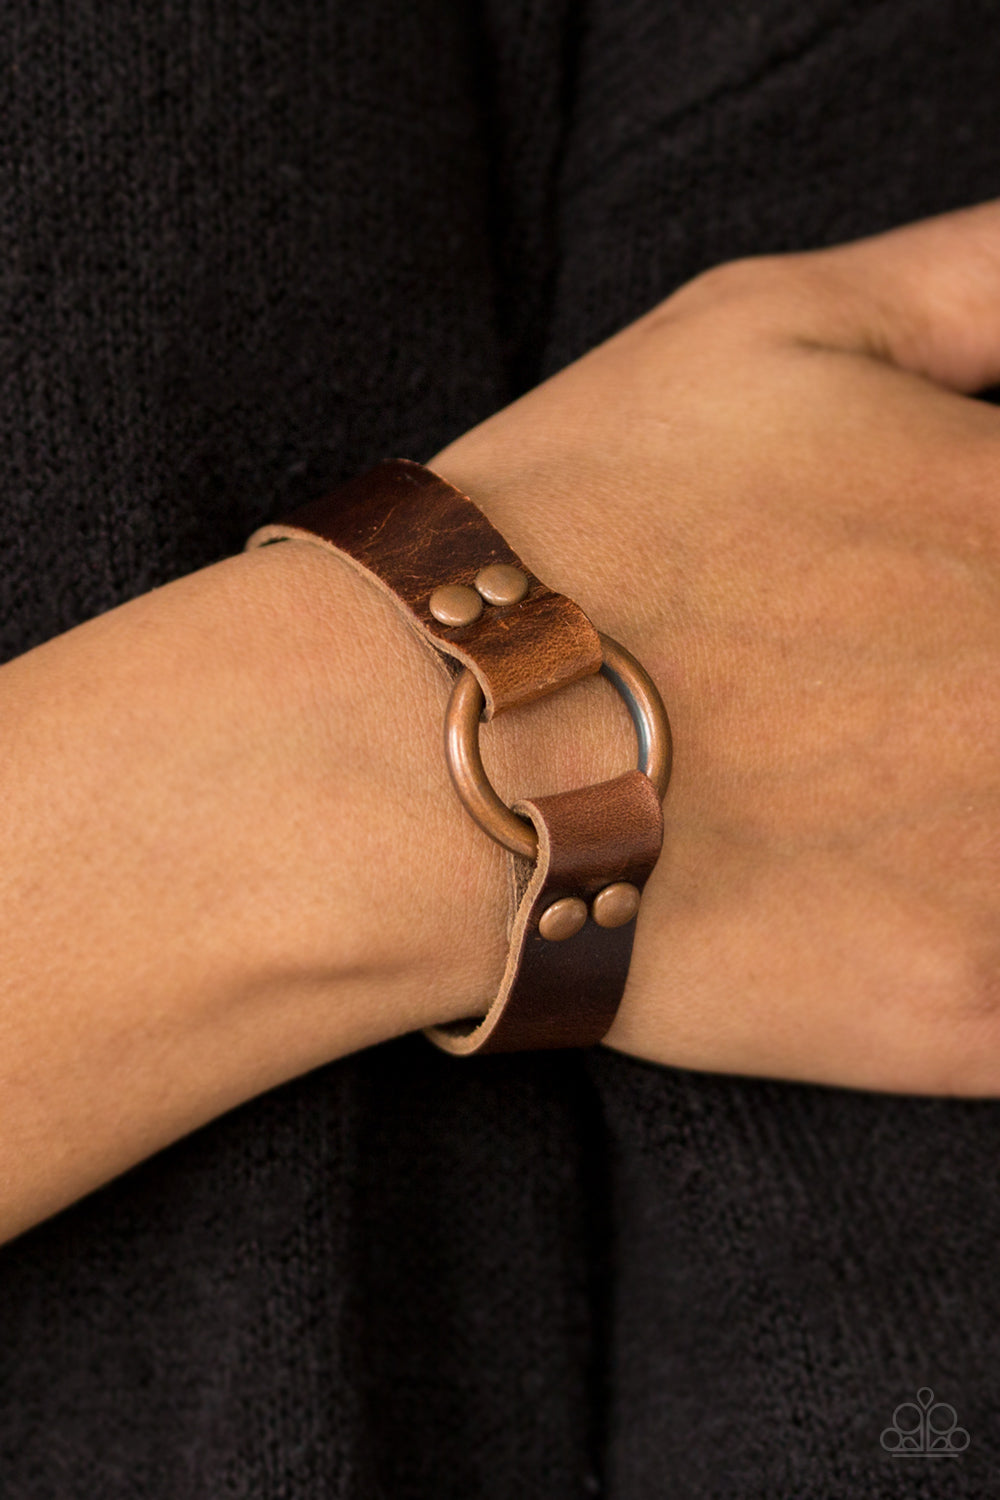 URBAN OUTLAW - COPPER RING BROWN LEATHER WRAP BRACELET